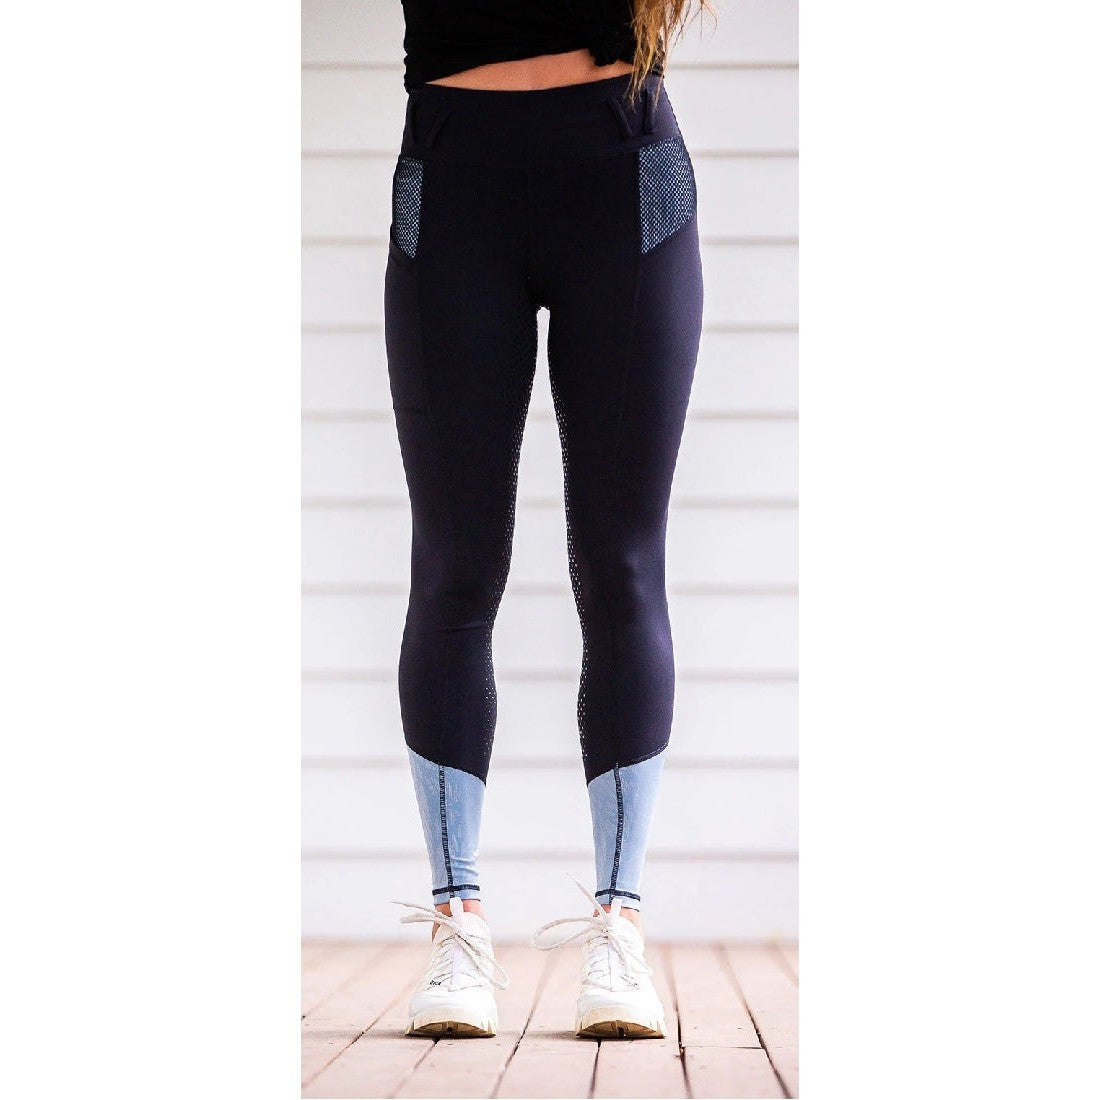 Person standing in black horse riding tights with mesh details.